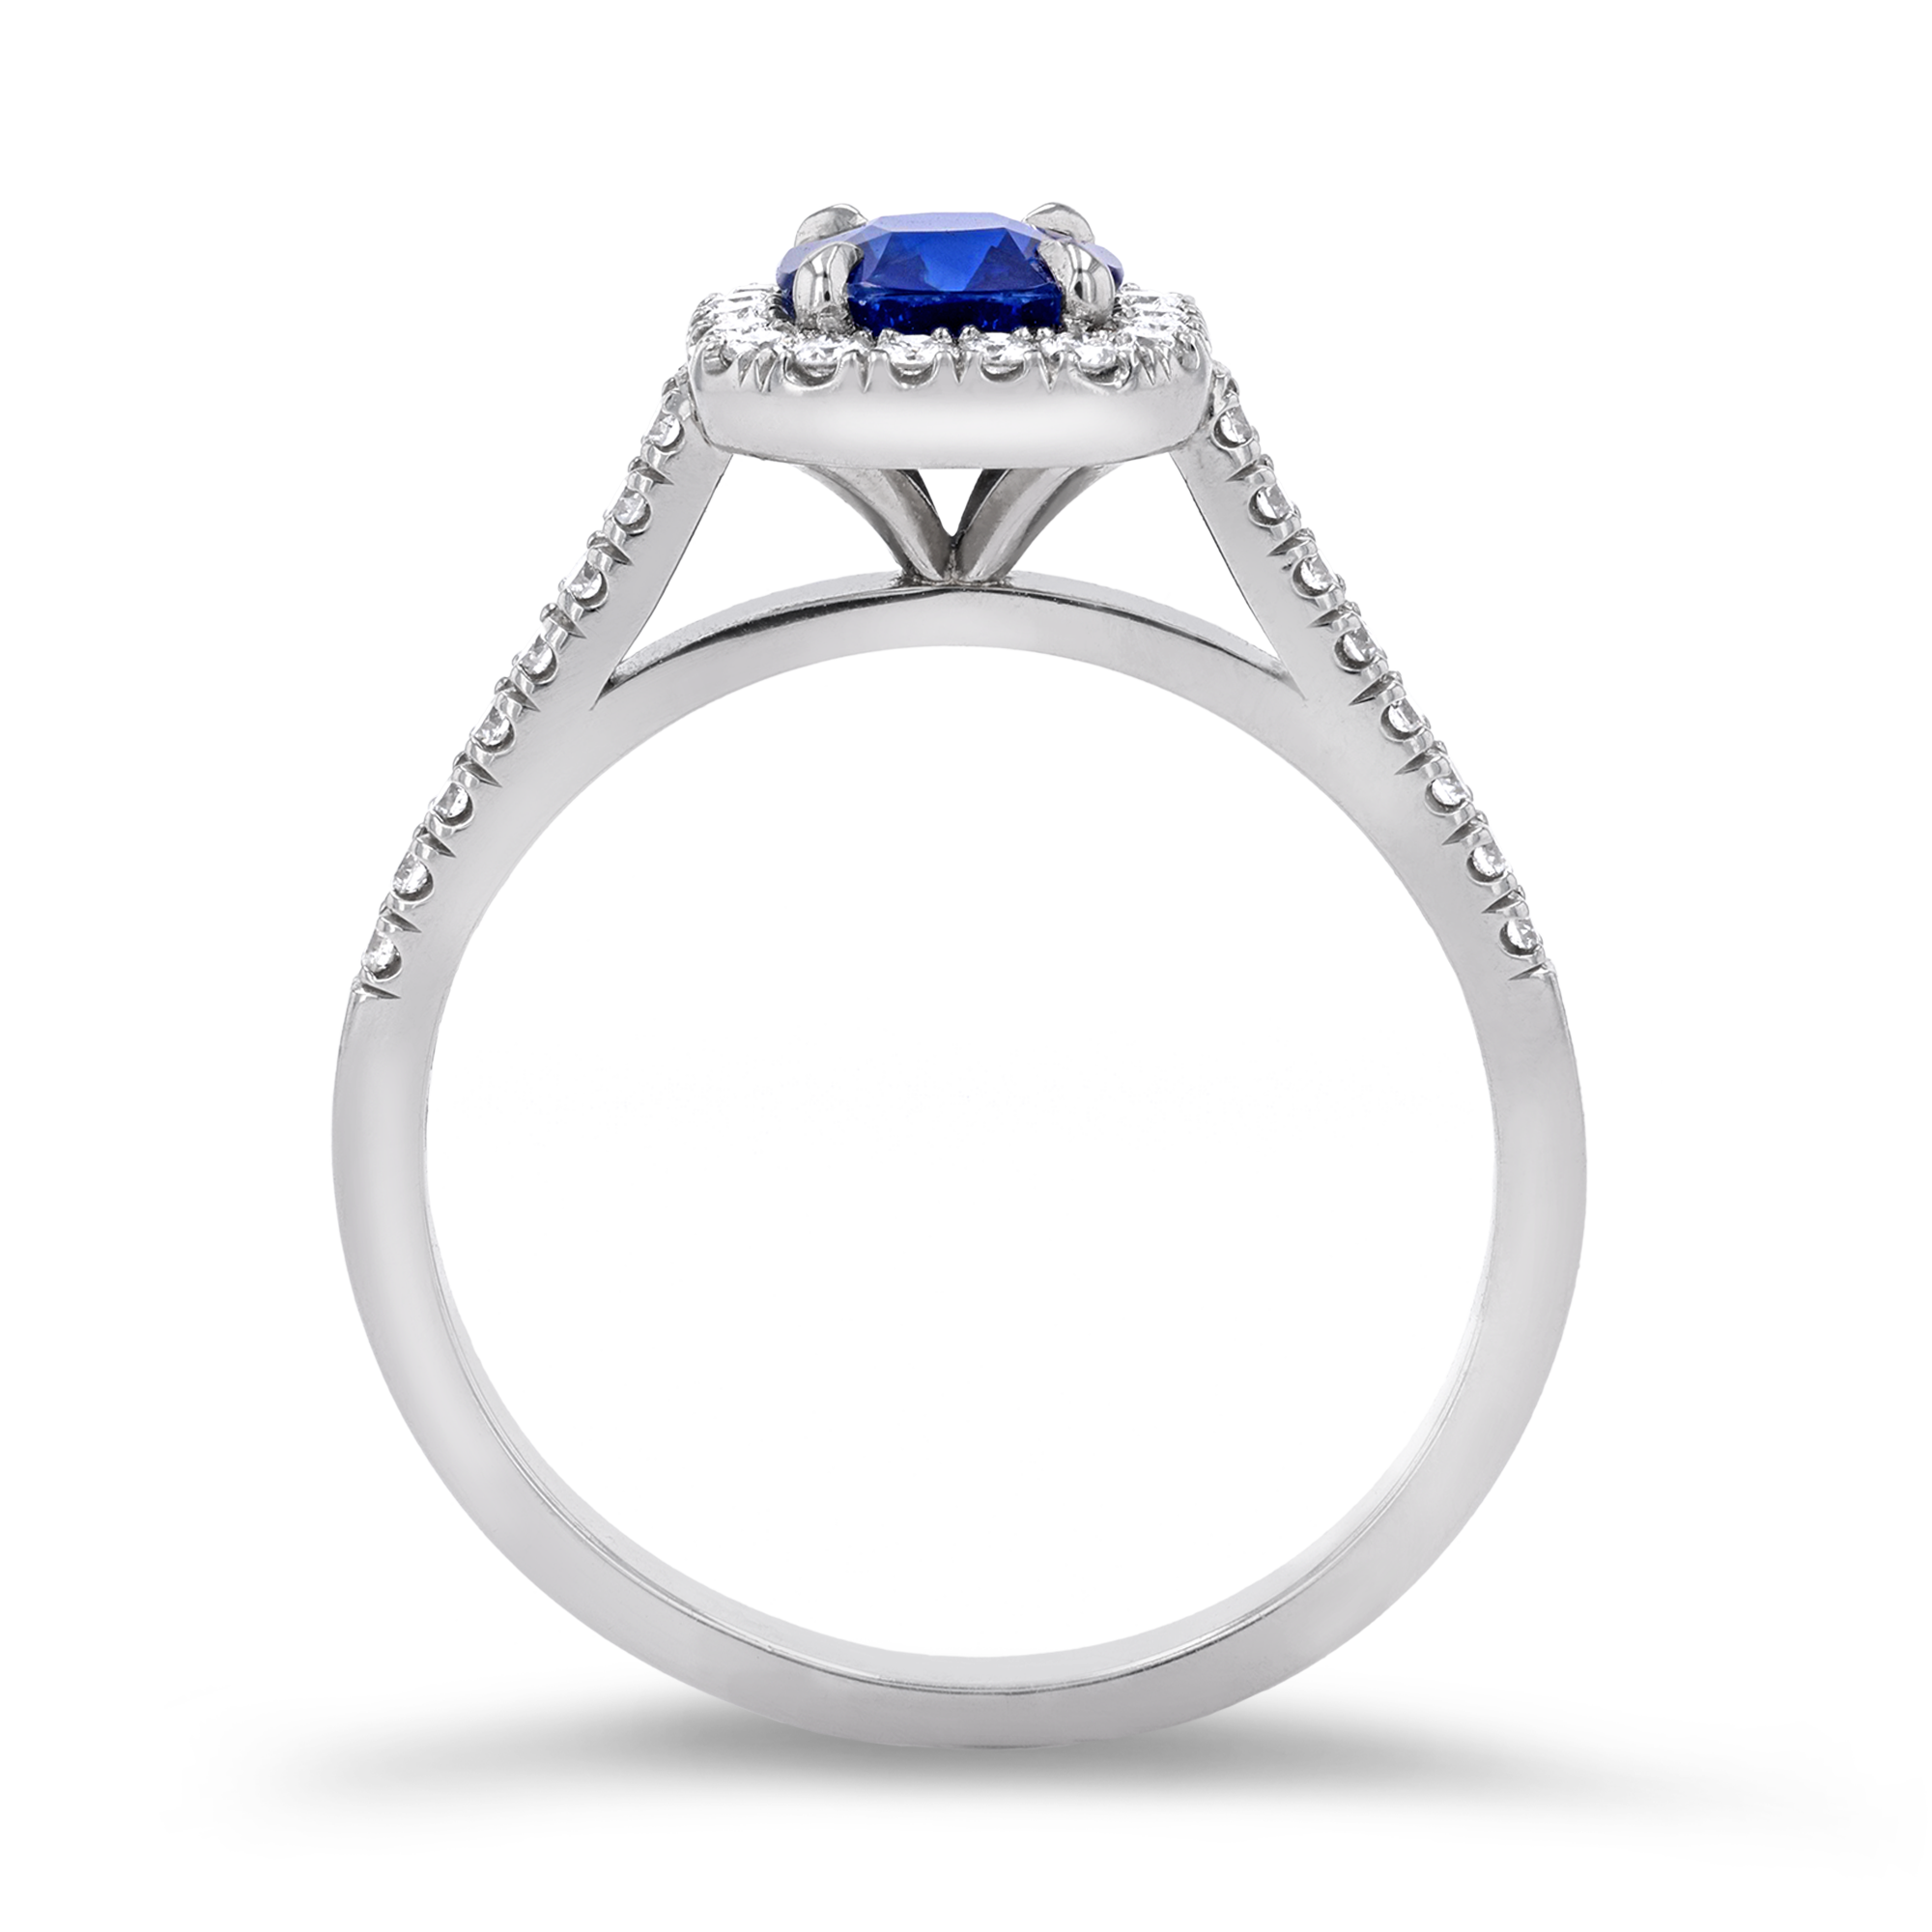 Celestial 0.94ct Sapphire and Diamond Cluster Ring Cushion Antique Cut, Claw Set_3